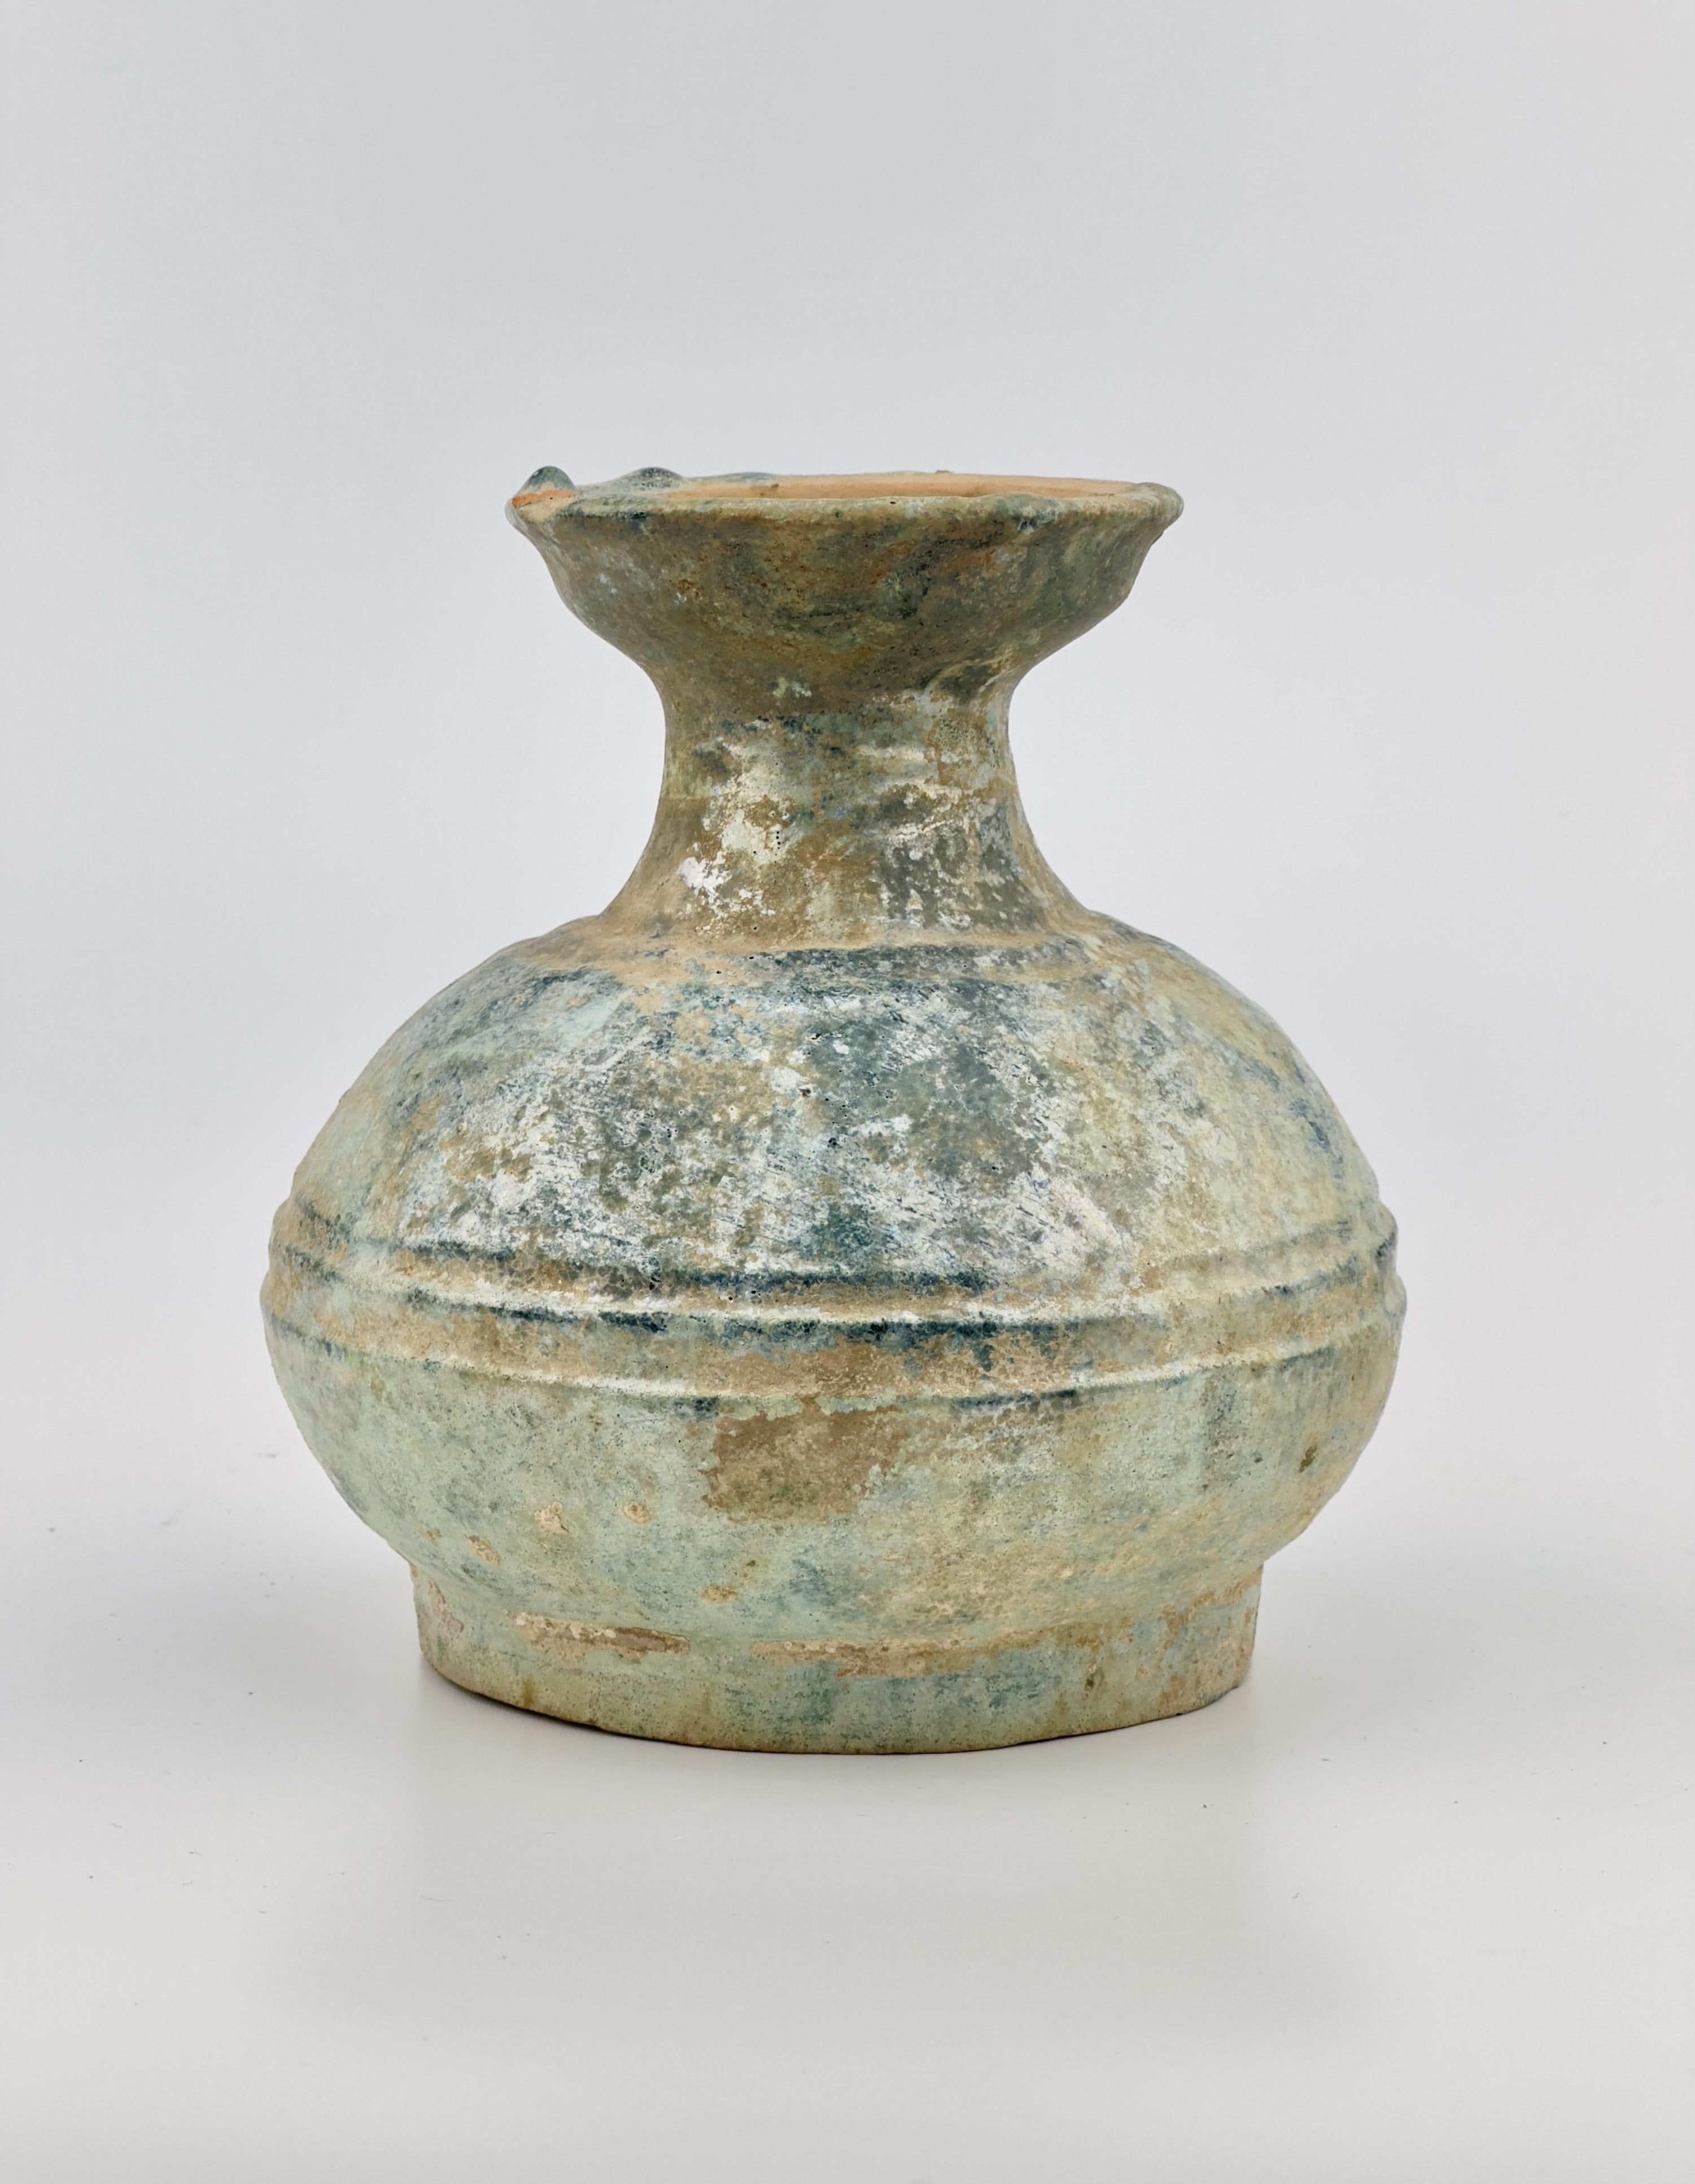 A 'Hu' is a type of large jar or pot that was commonly used in China for storage purposes, including holding liquids or dry goods like grains. This particular shape of pottery usually features a wide body and a narrow opening, and sometimes comes